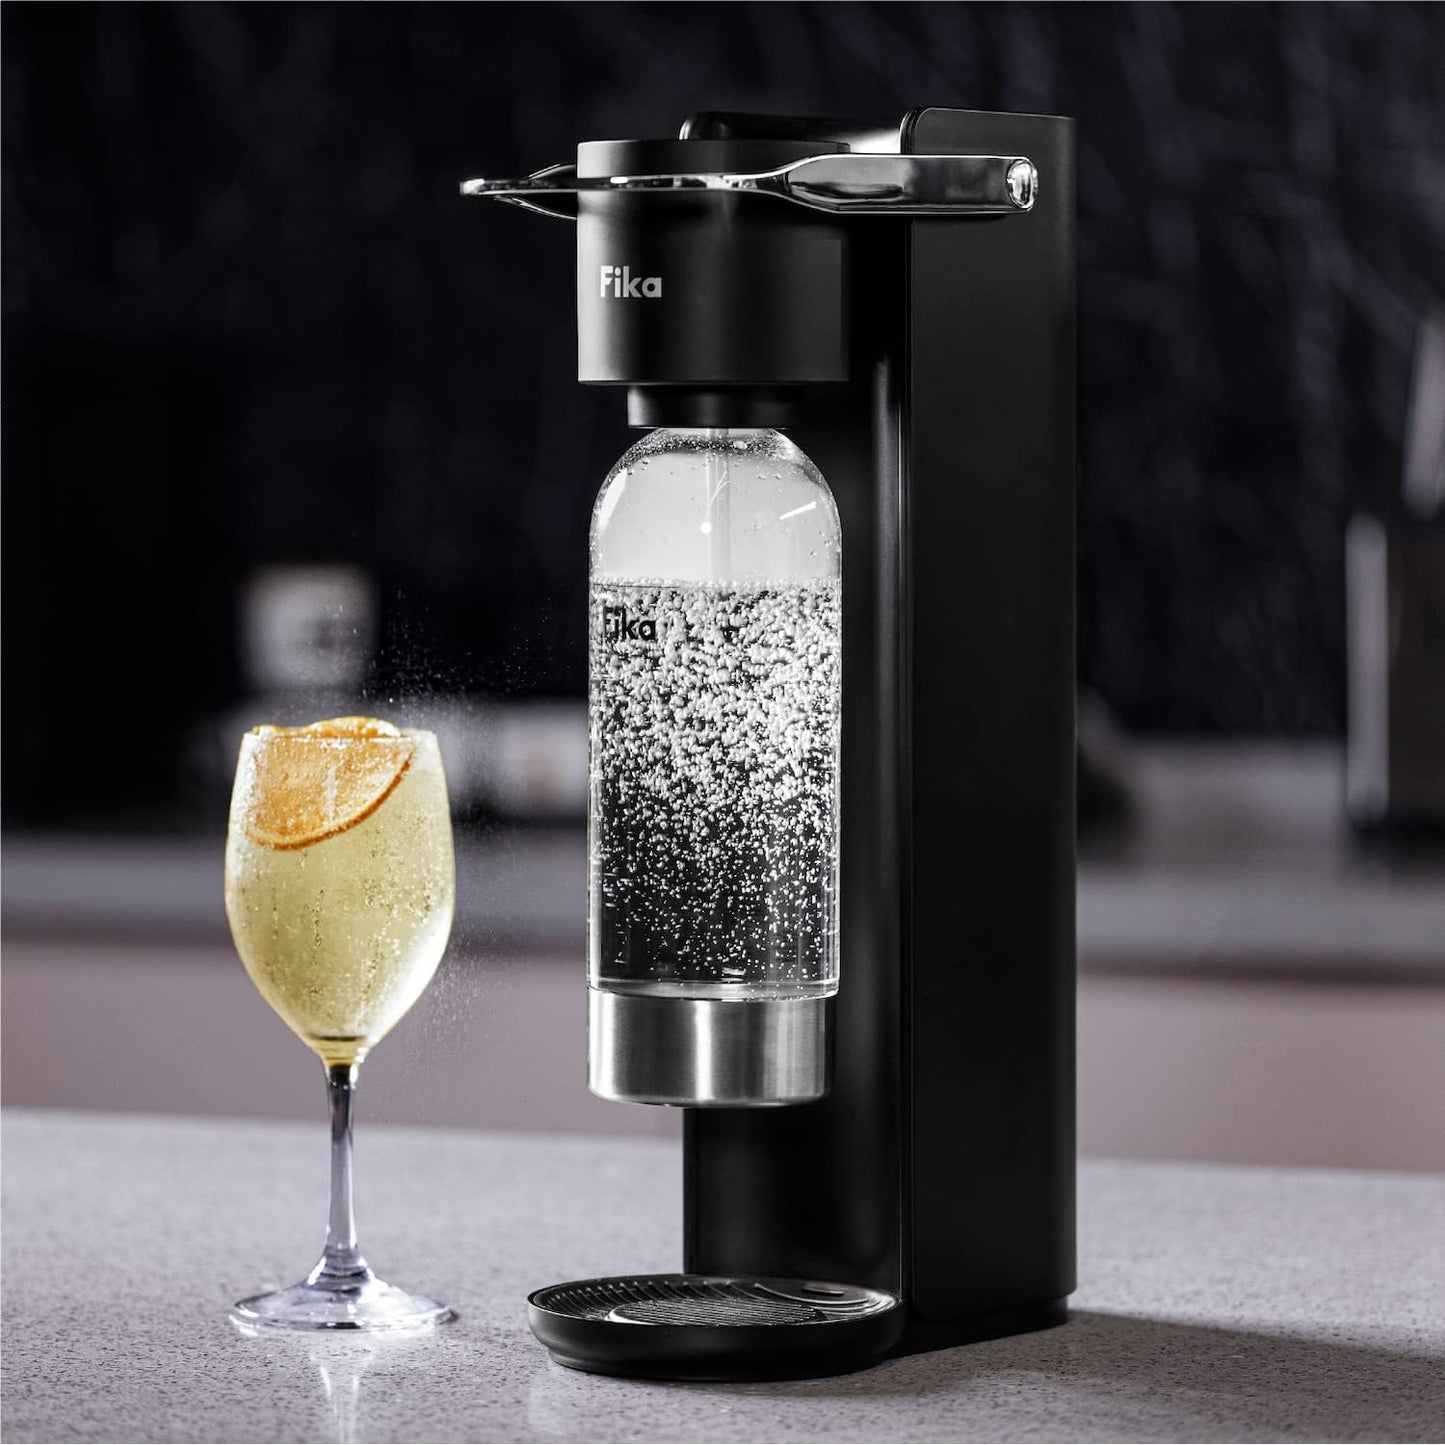 Carbonator Pro by Fika - High Performance Carbonator/Sparkling Water Maker - Soda Streaming Machine with BPA-free Bottle (Meteor Black, CO2 NOT Included)